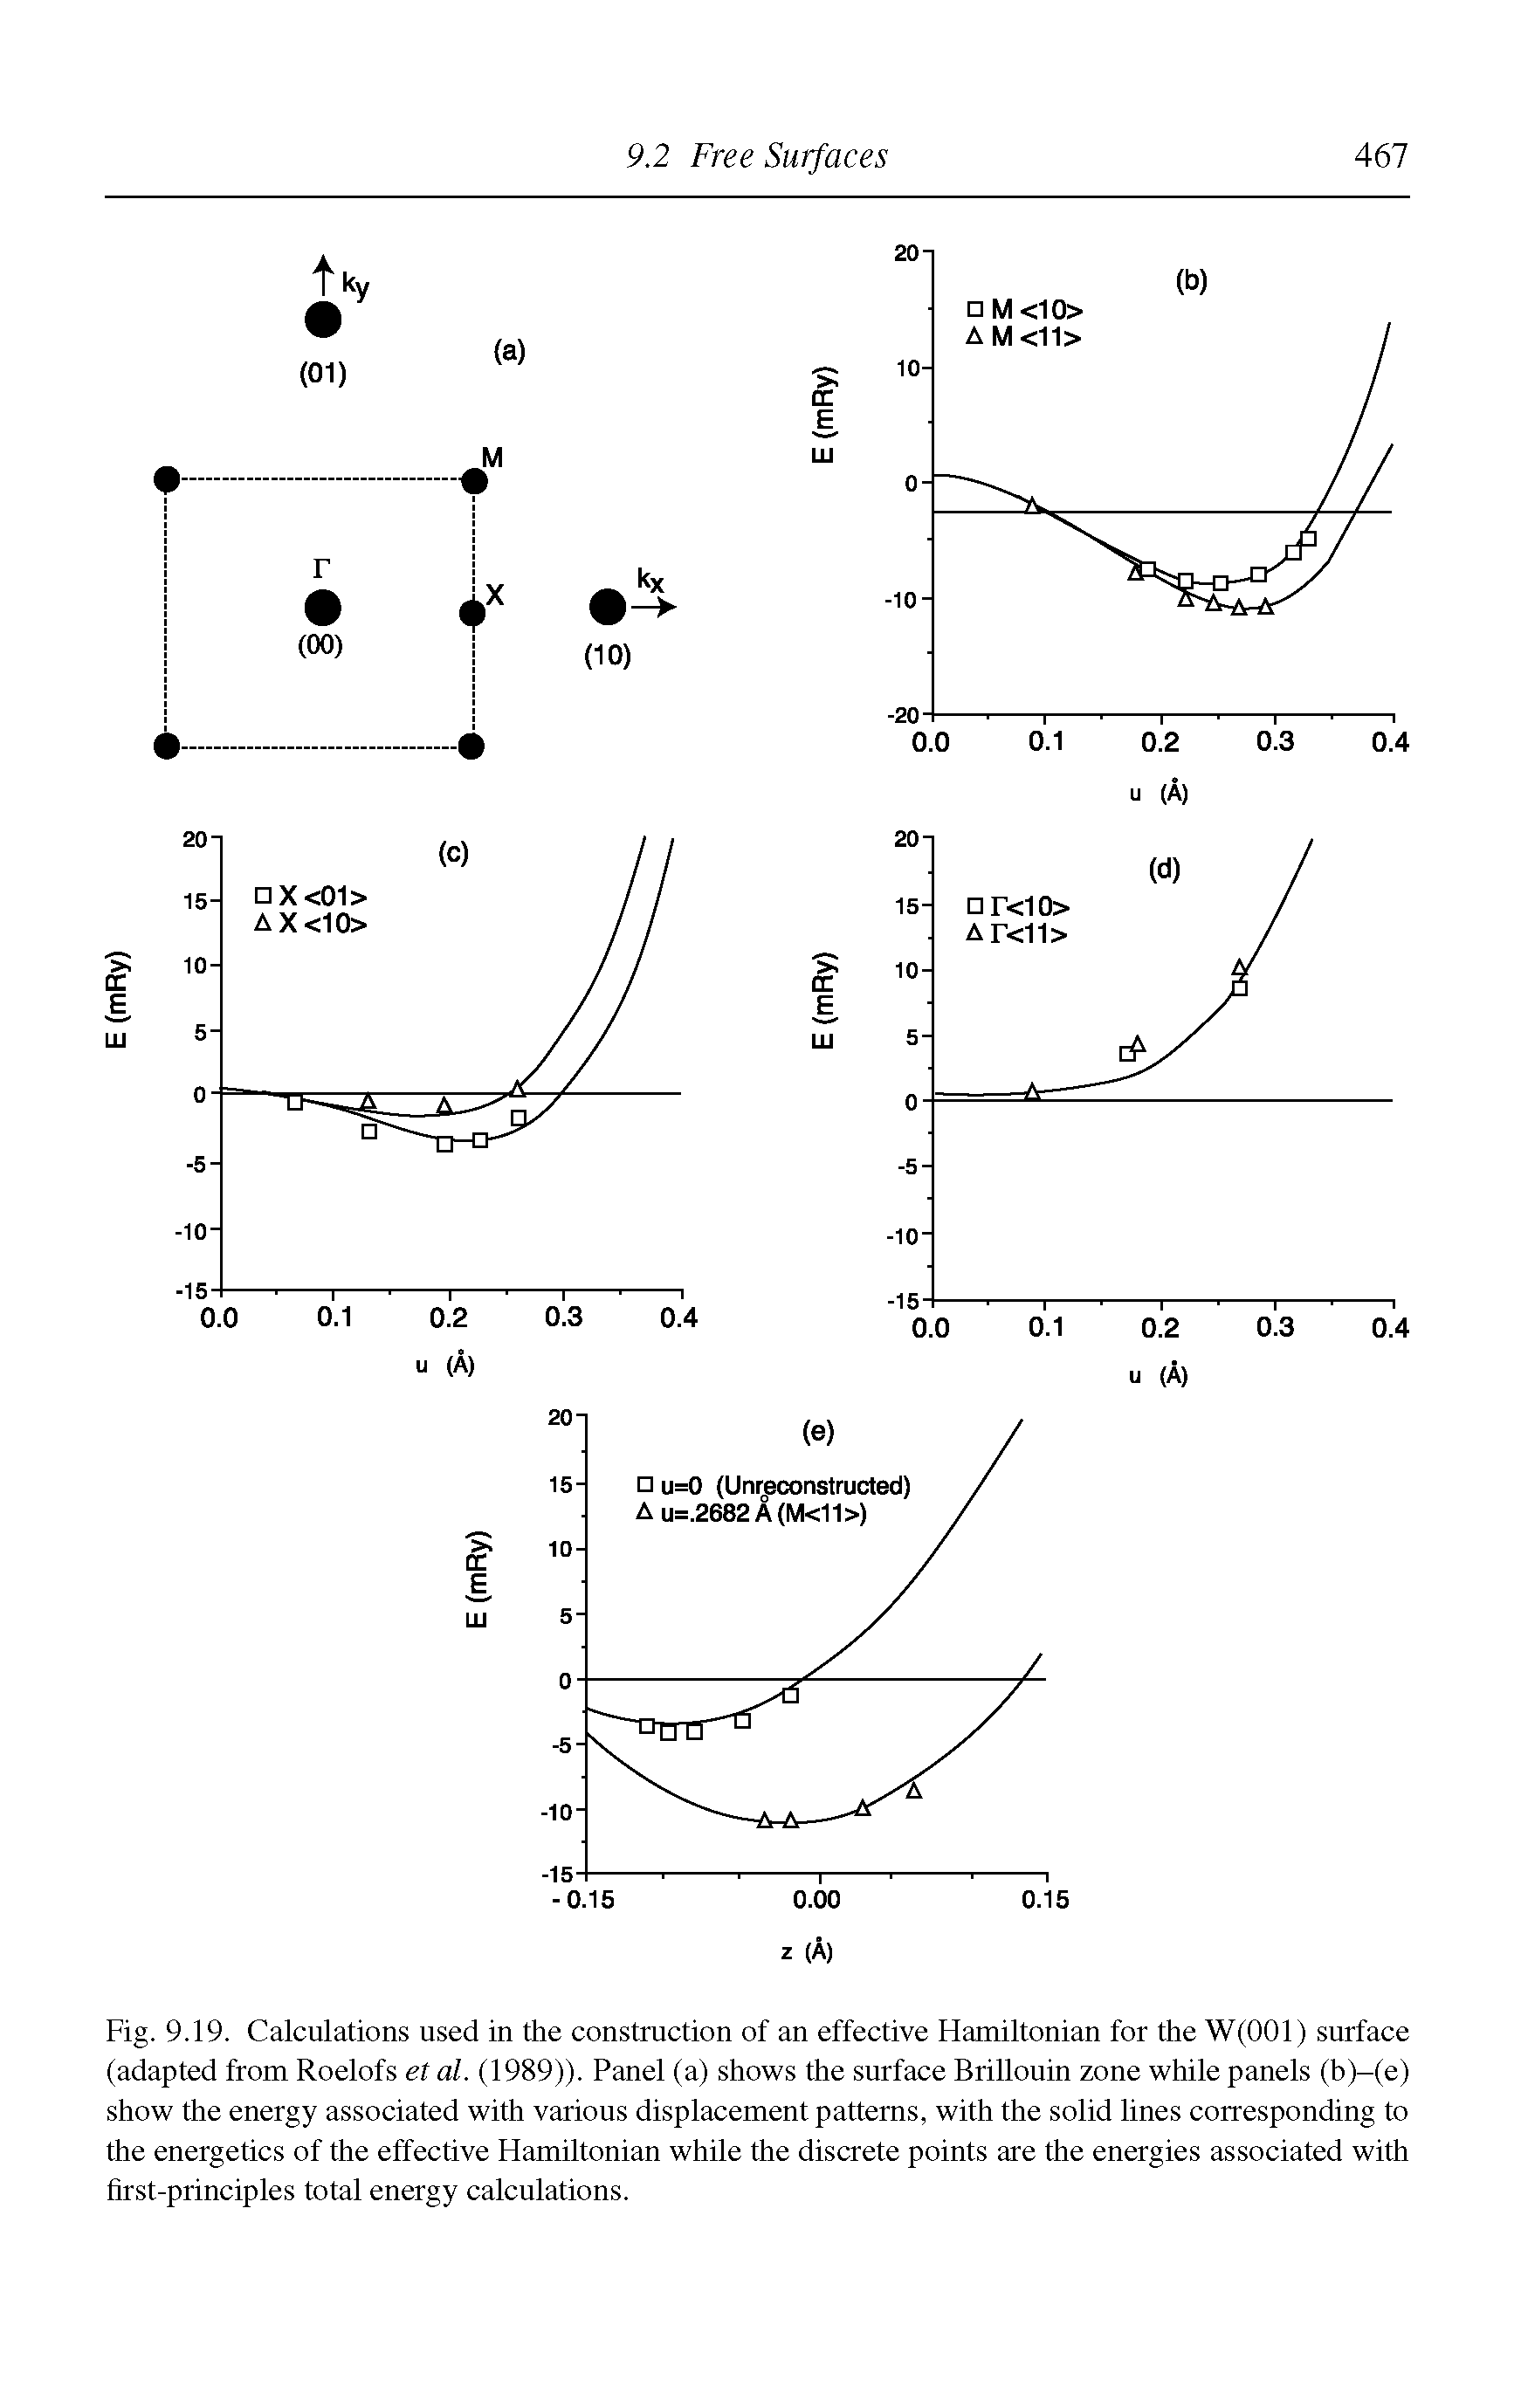 Fig. 9.19. Calculations used in the construction of an effective Hamiltonian for the W(OOl) surface (adapted from Roelofs et al. (1989)). Panel (a) shows the surface Brillouin zone while panels (b)-(e) show the energy associated with various displacement patterns, with the solid lines corresponding to the energetics of the effective Hamiltonian while the discrete points are the energies associated with first-principles total energy calculations.